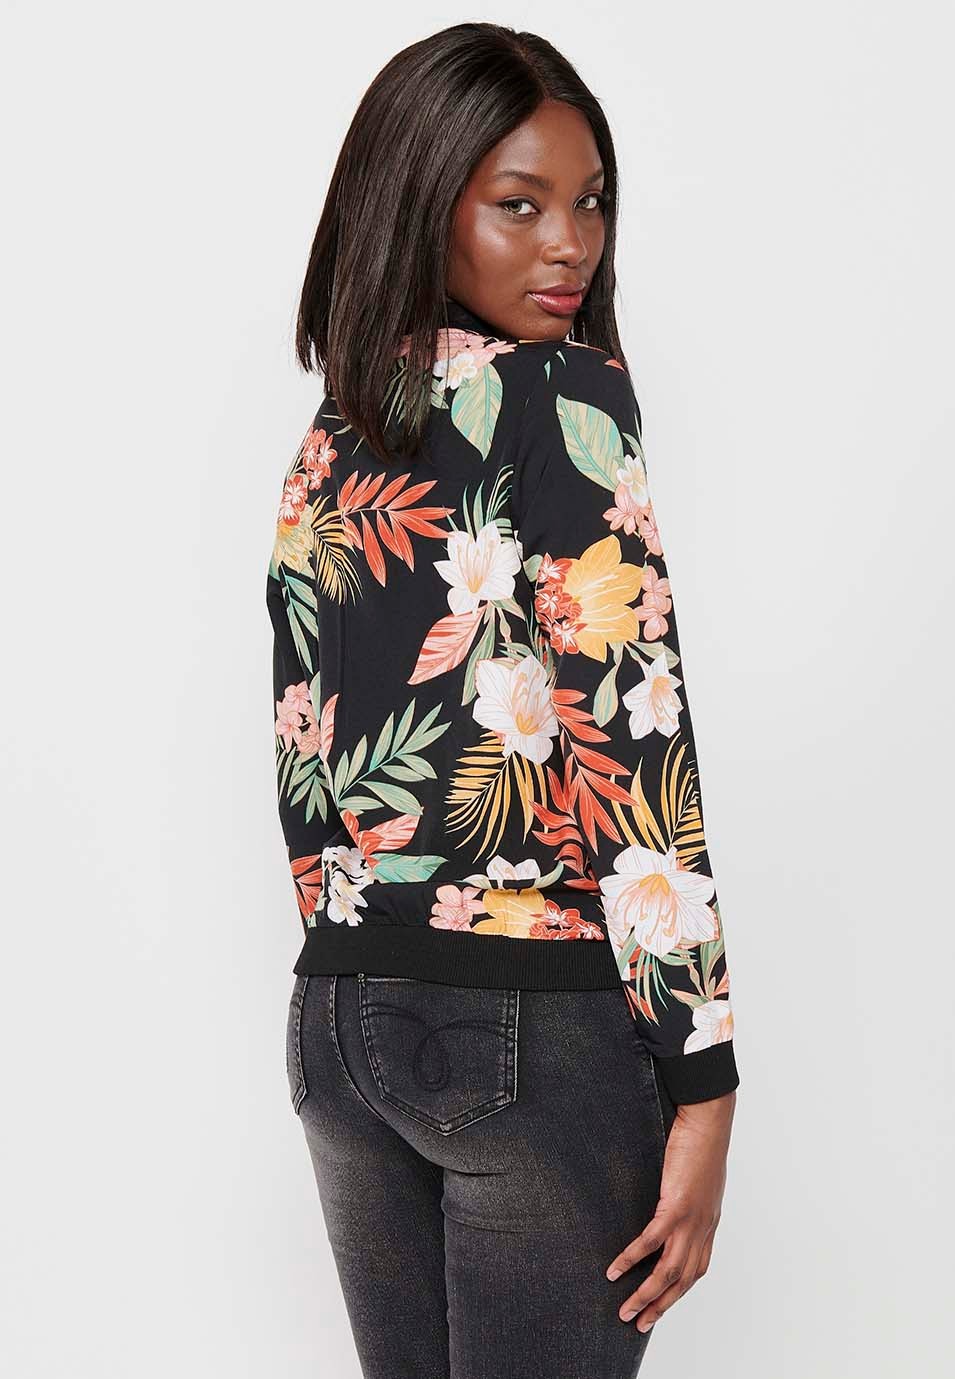 Long-sleeved sweatshirt jacket with ribbed finishes and floral print with front zipper closure in Multicolor for Women 9